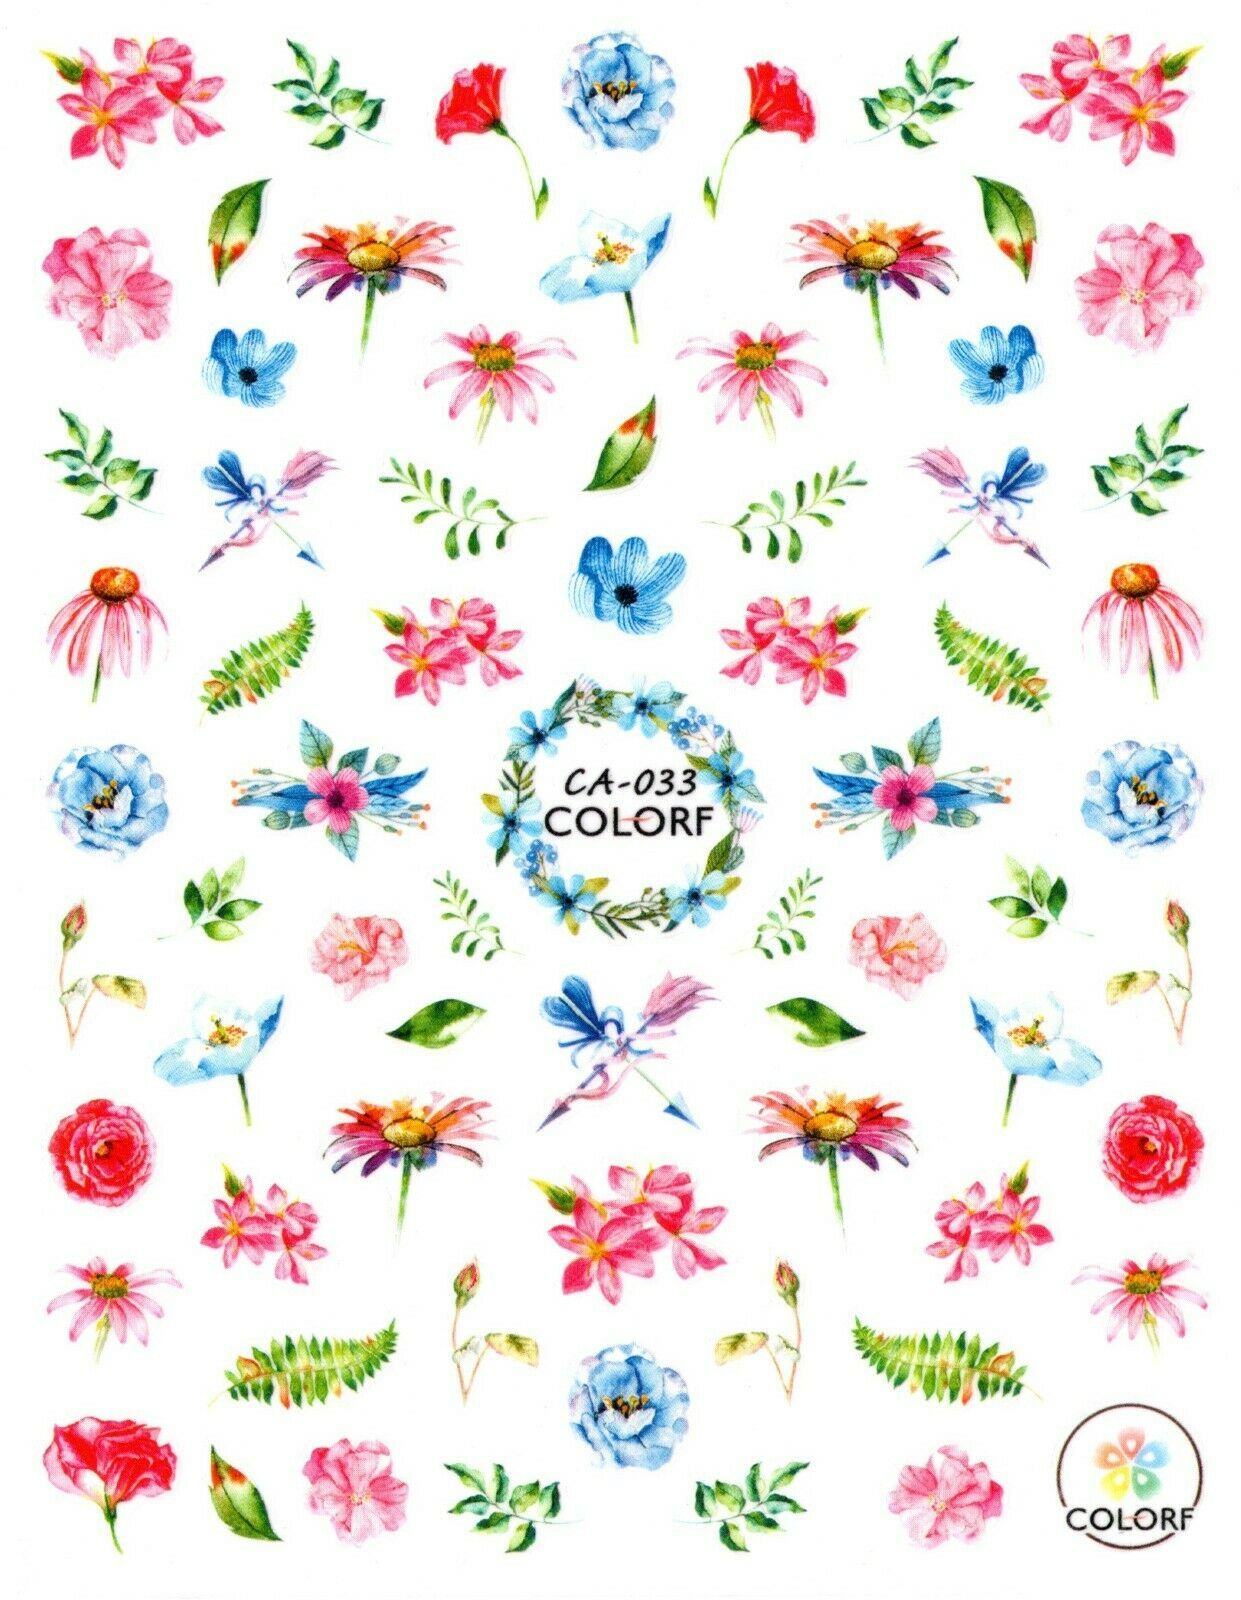 Nail Art 3D Decal Stickers Pink Blue Green Flowers CA033